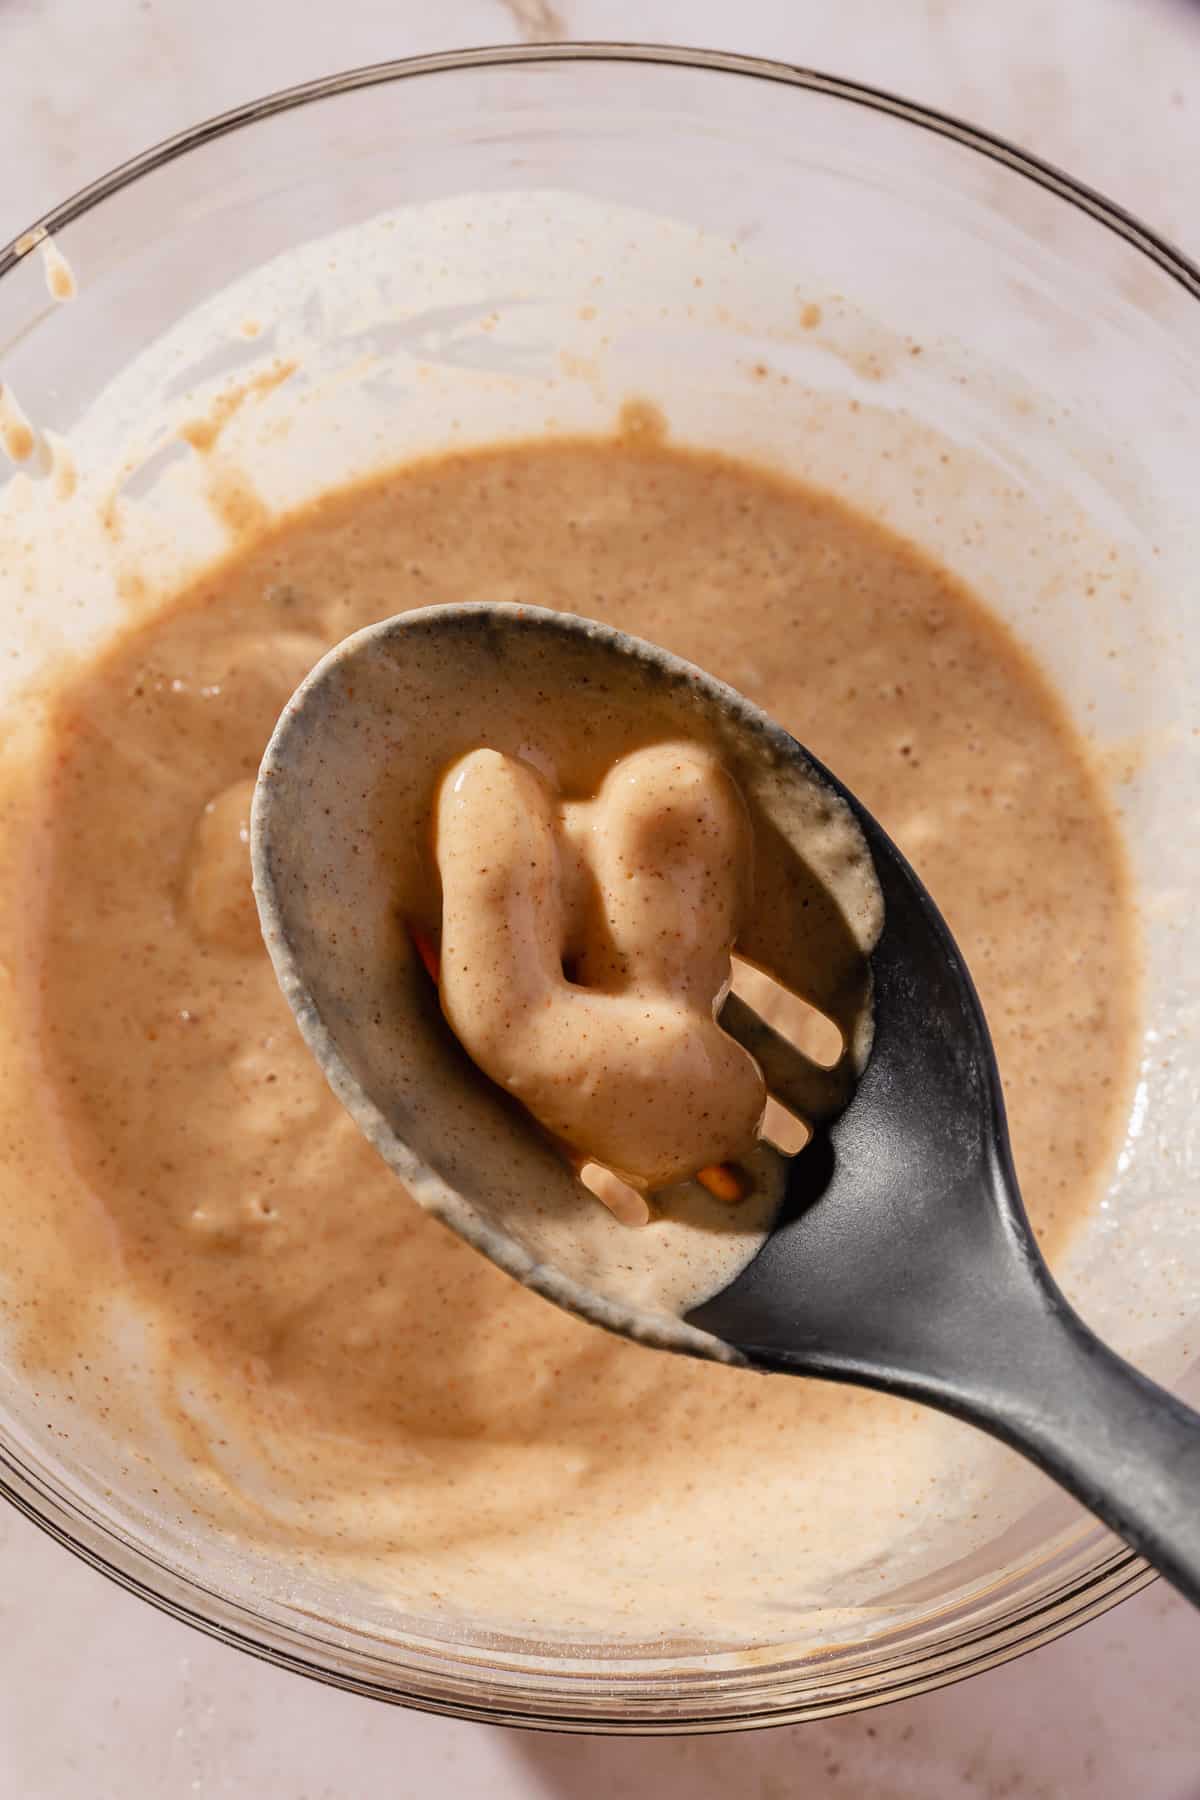 A slotted spoon removing a few cheese curds from the gluten-free batter.